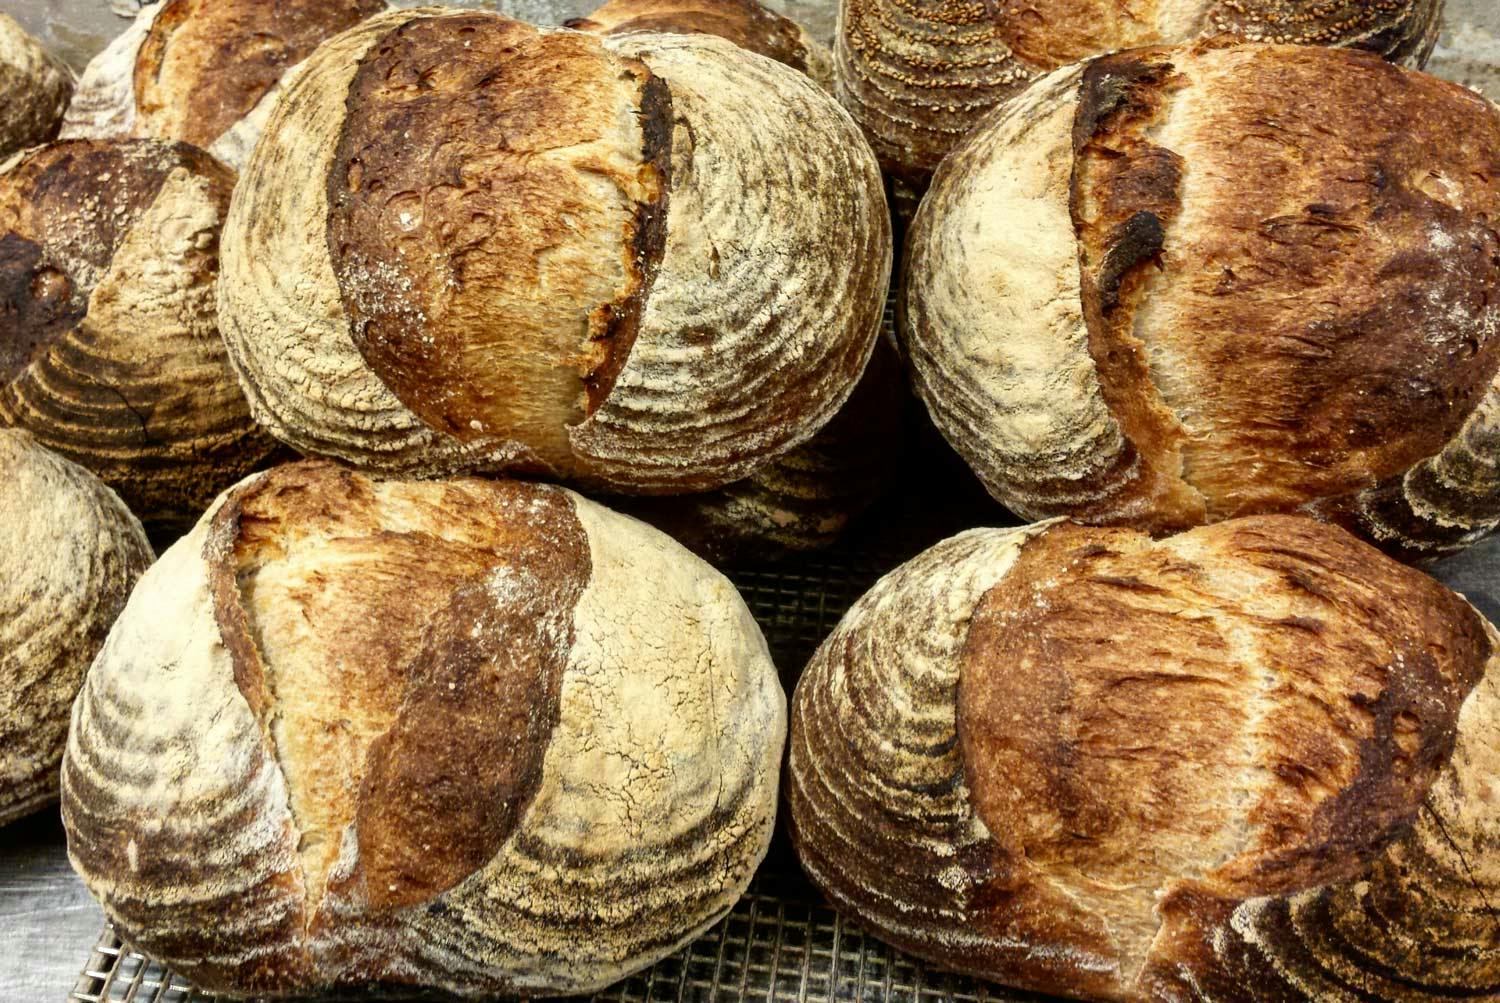 A stack of golden, oval-shaped, crusty sourdough bread dusted with flour at Bread by Us bakery.